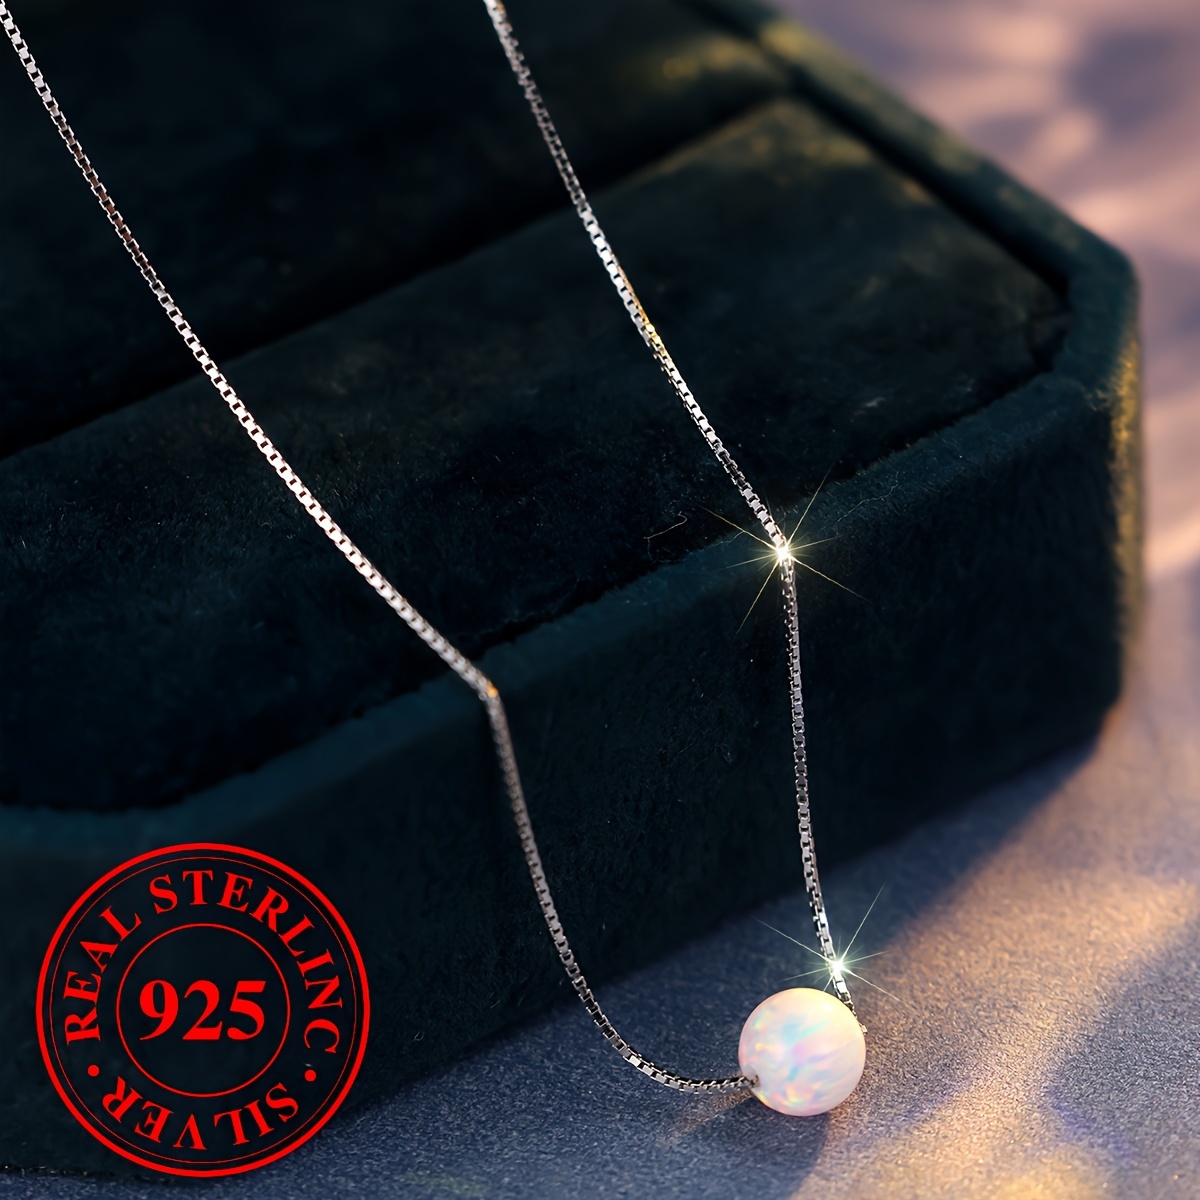 

Simple 925 Sterling Silver Round Ball White Opal Pendant Necklace Women's Engagement Wedding Gift